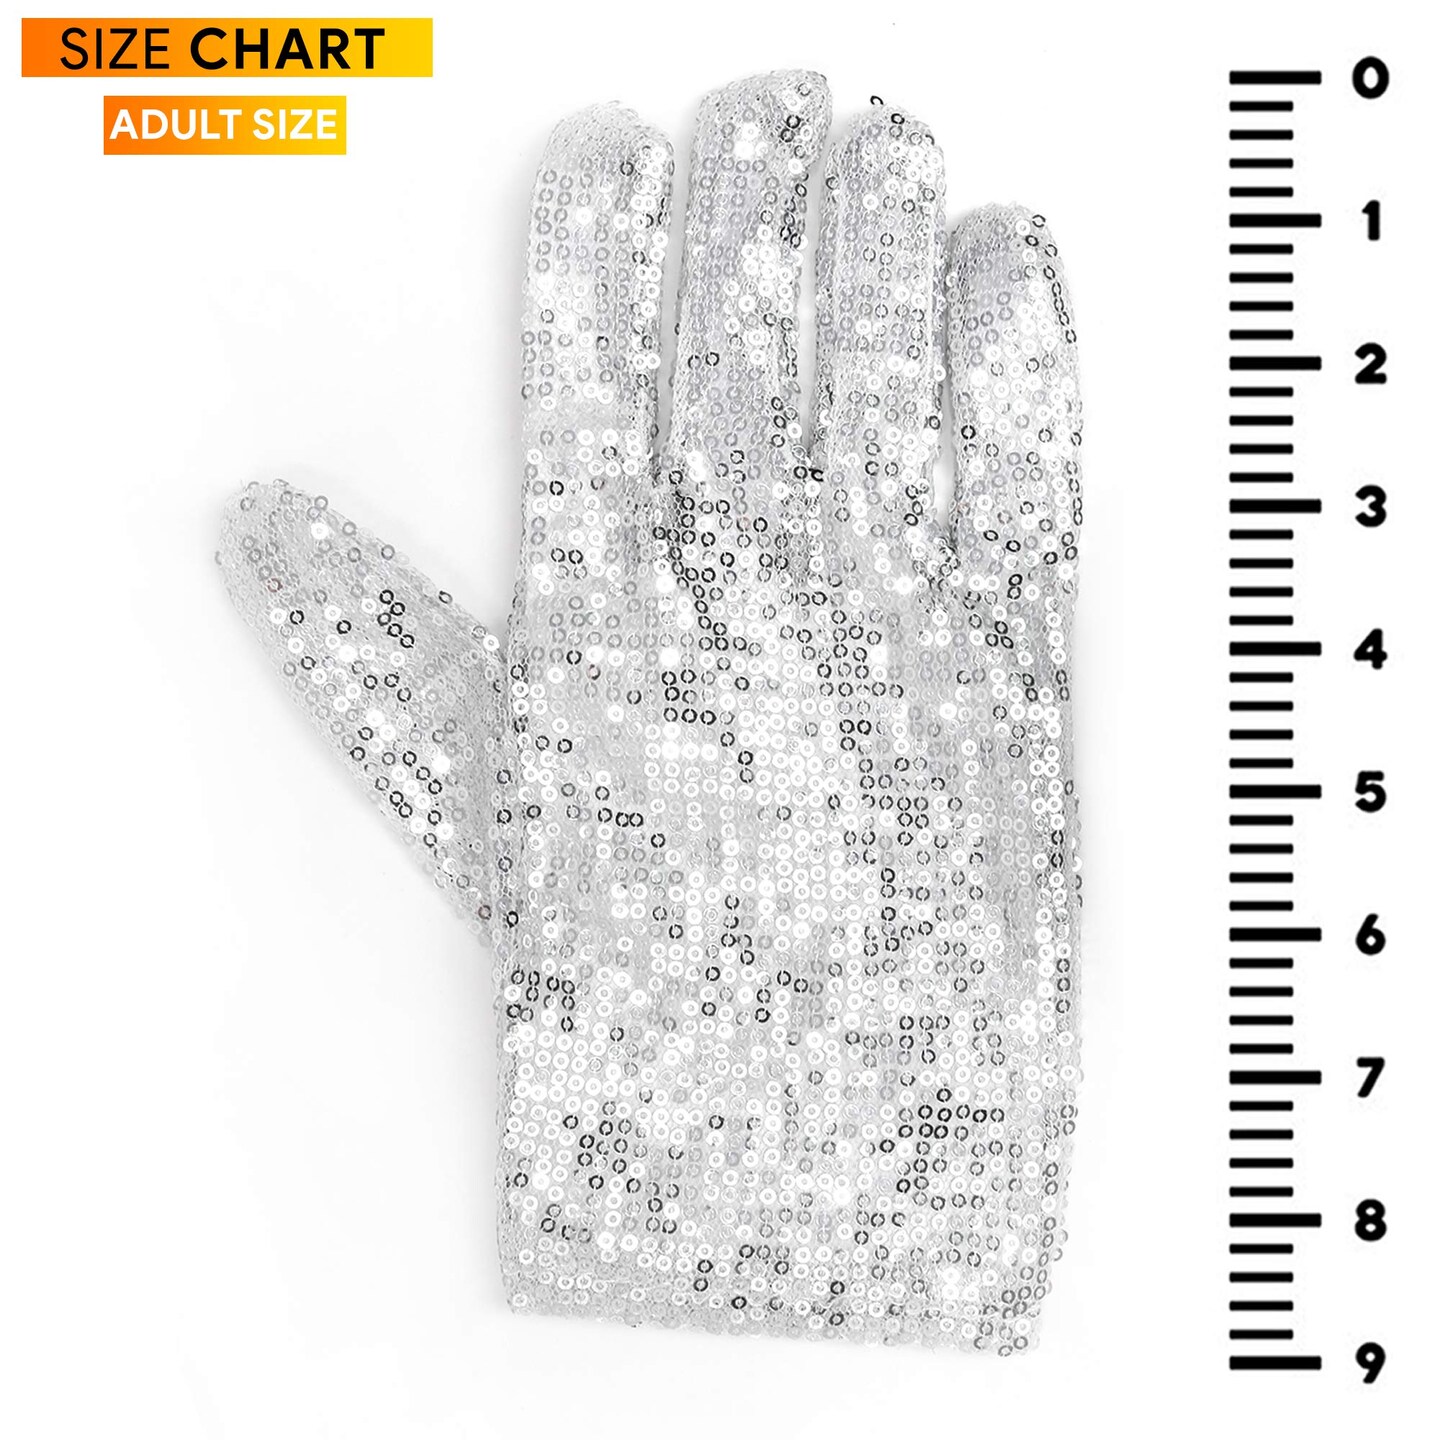 Sparkly Silver Sequin Glove Right Hand